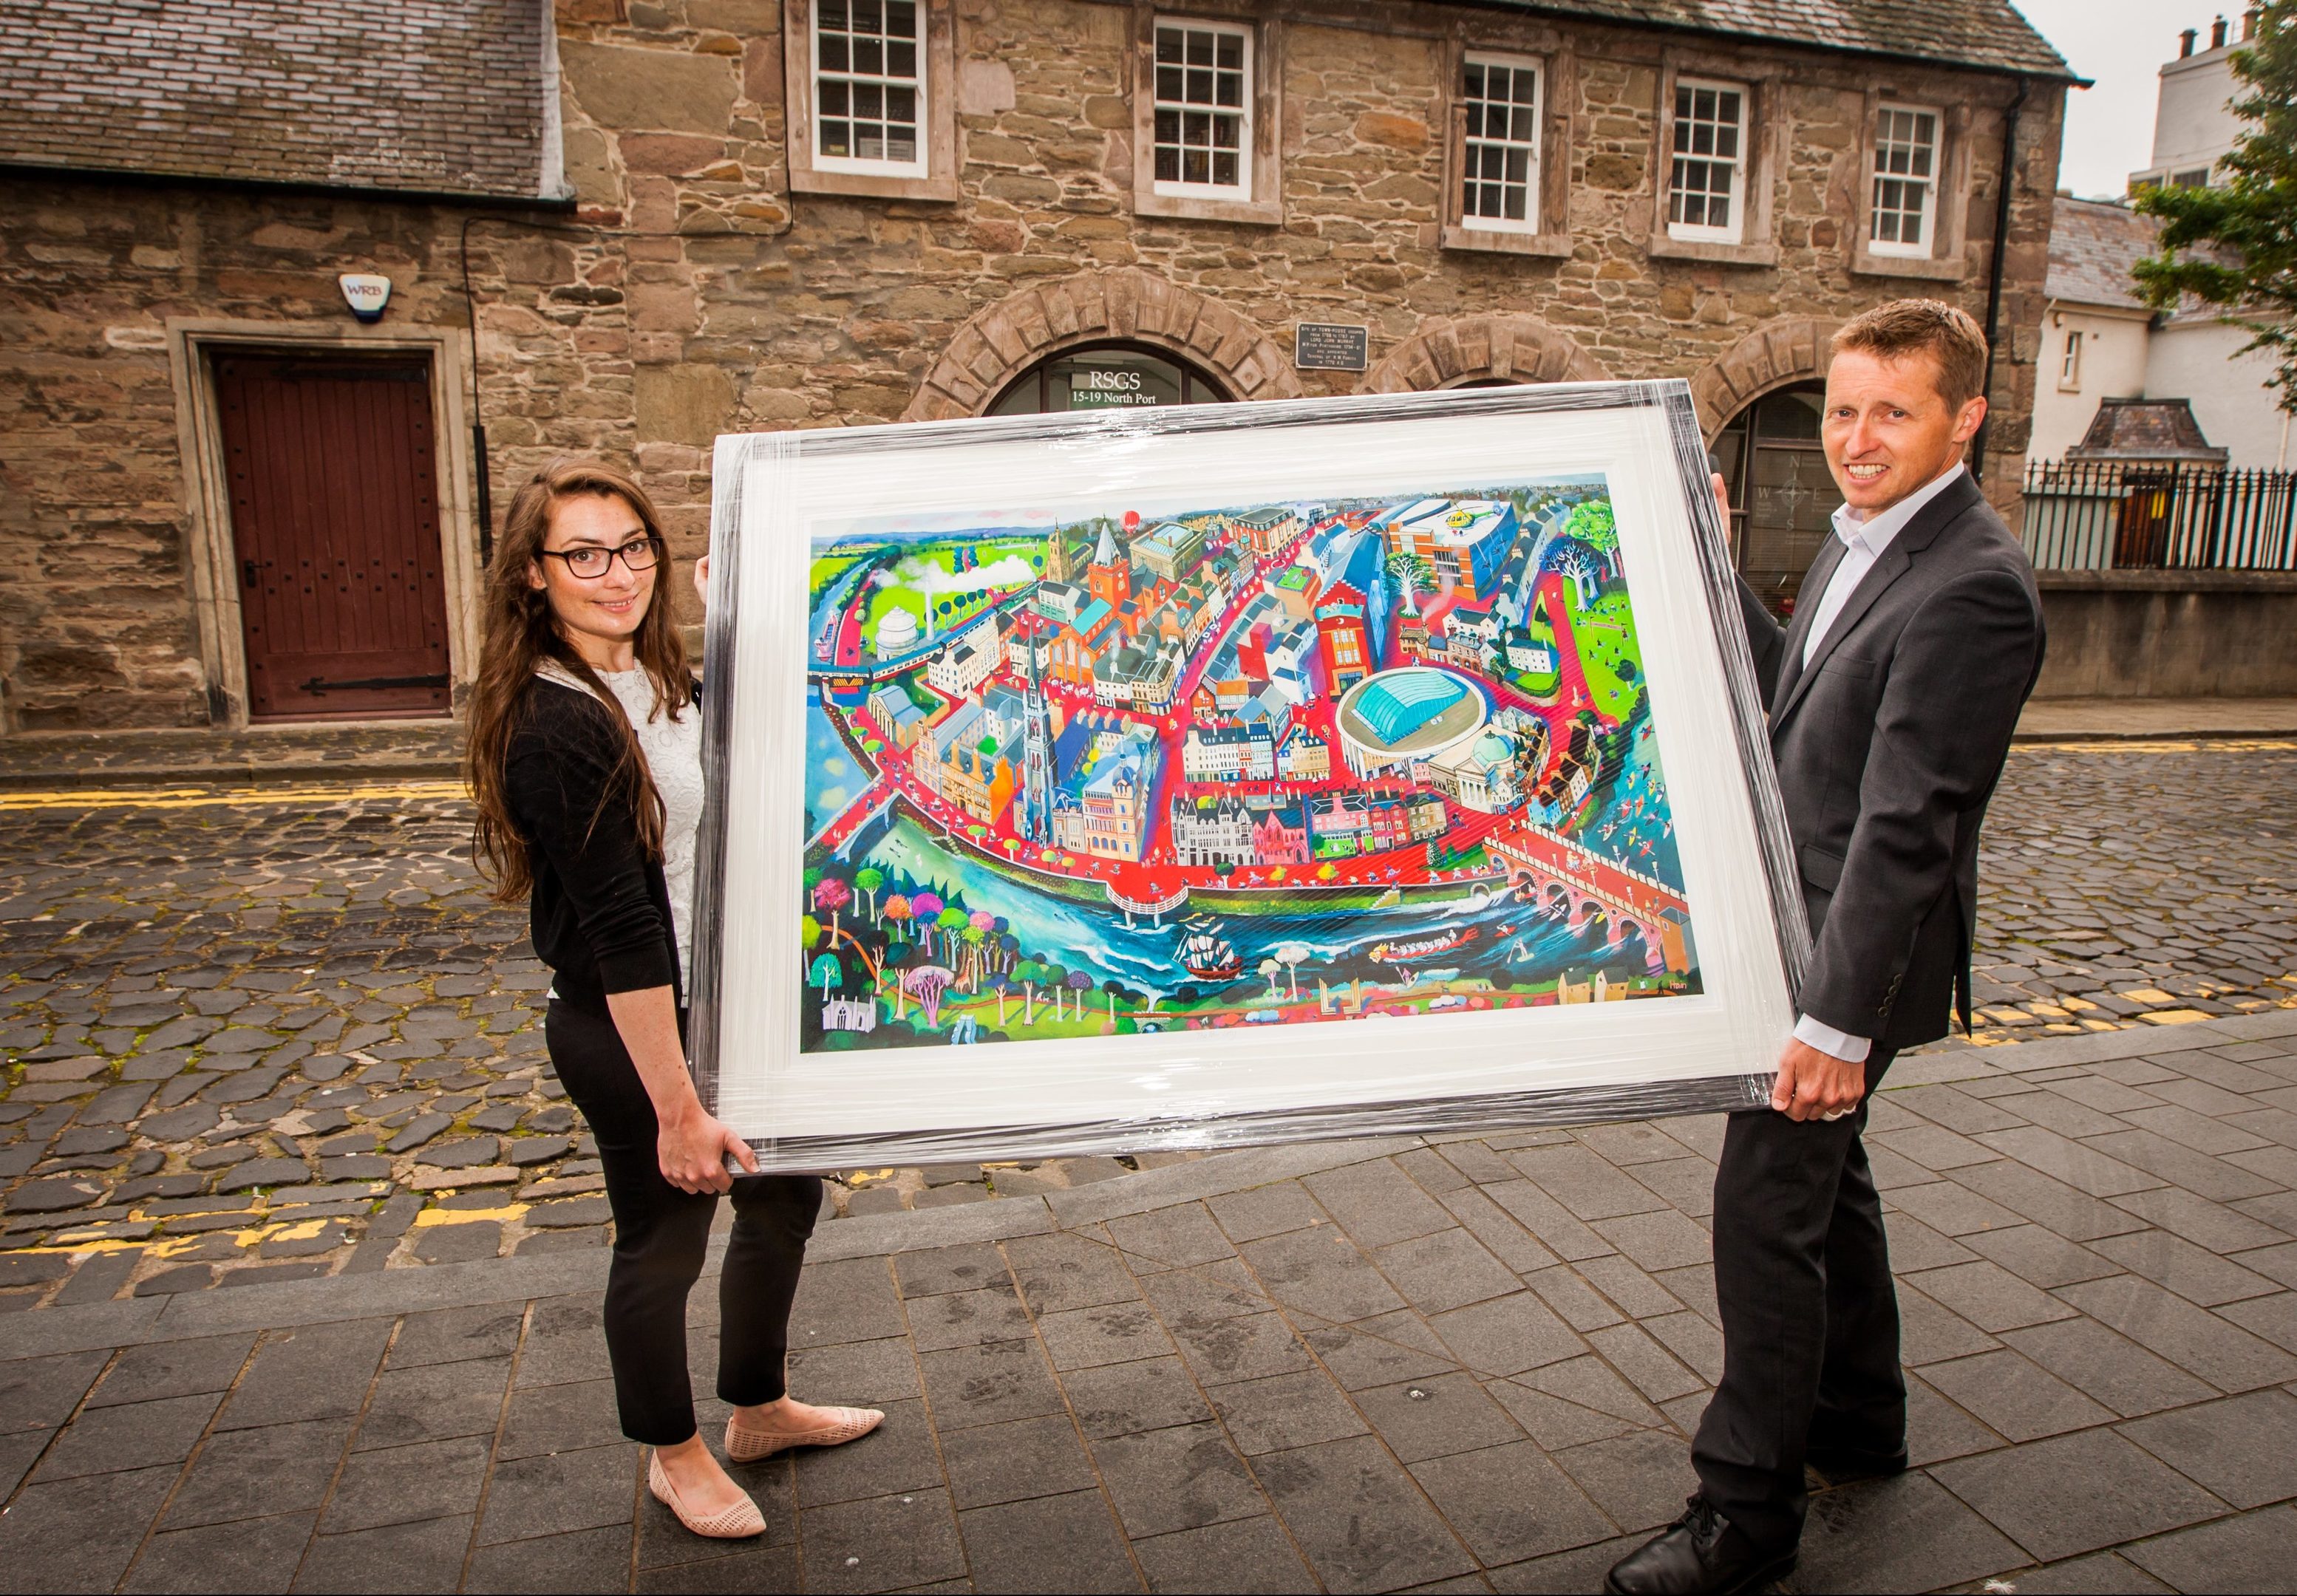 Gemma McDonald (RSGS communications officer) alongside chief executive, Mike Robinson and the painting 'Fair City' at the Royal Scottish Geographical Society, North Port, Perth.